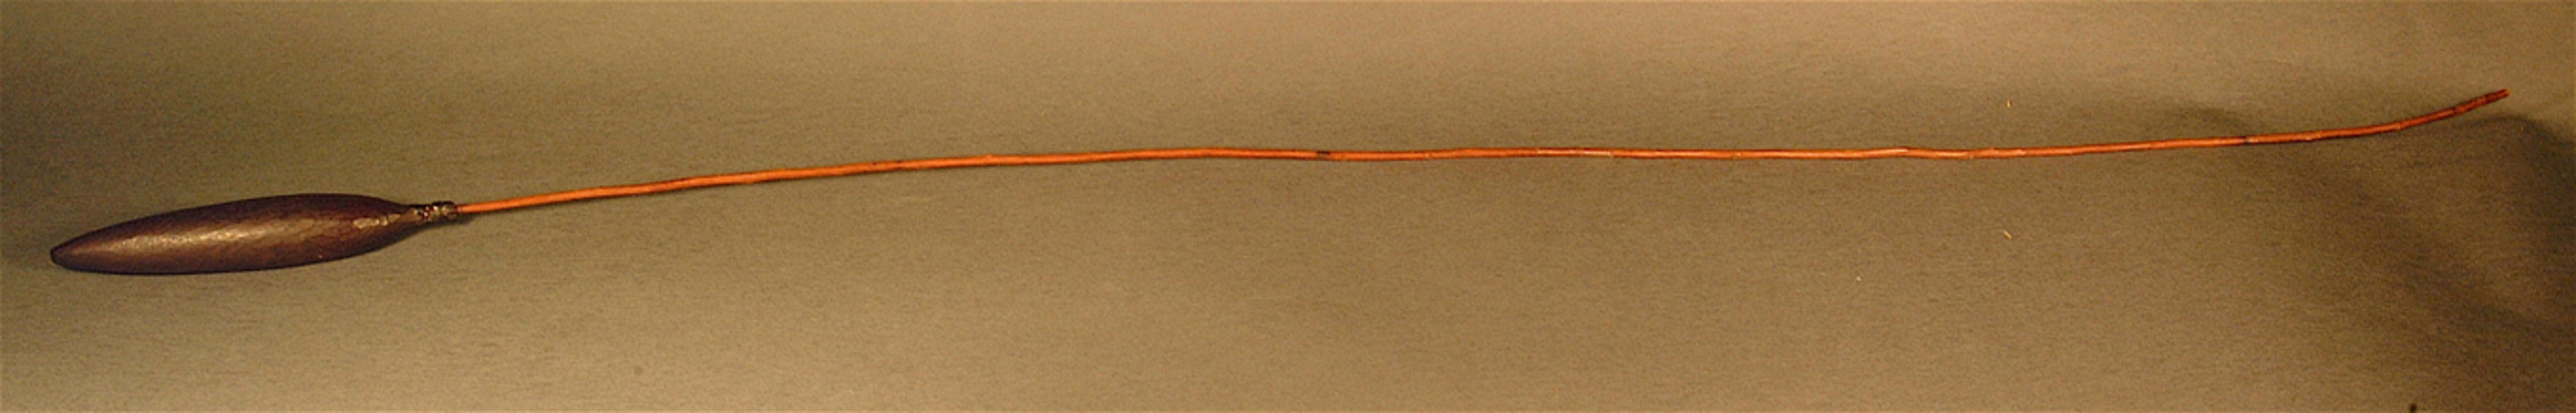 Long thin reed-like item with a thin oval-shaped bulb on one end.